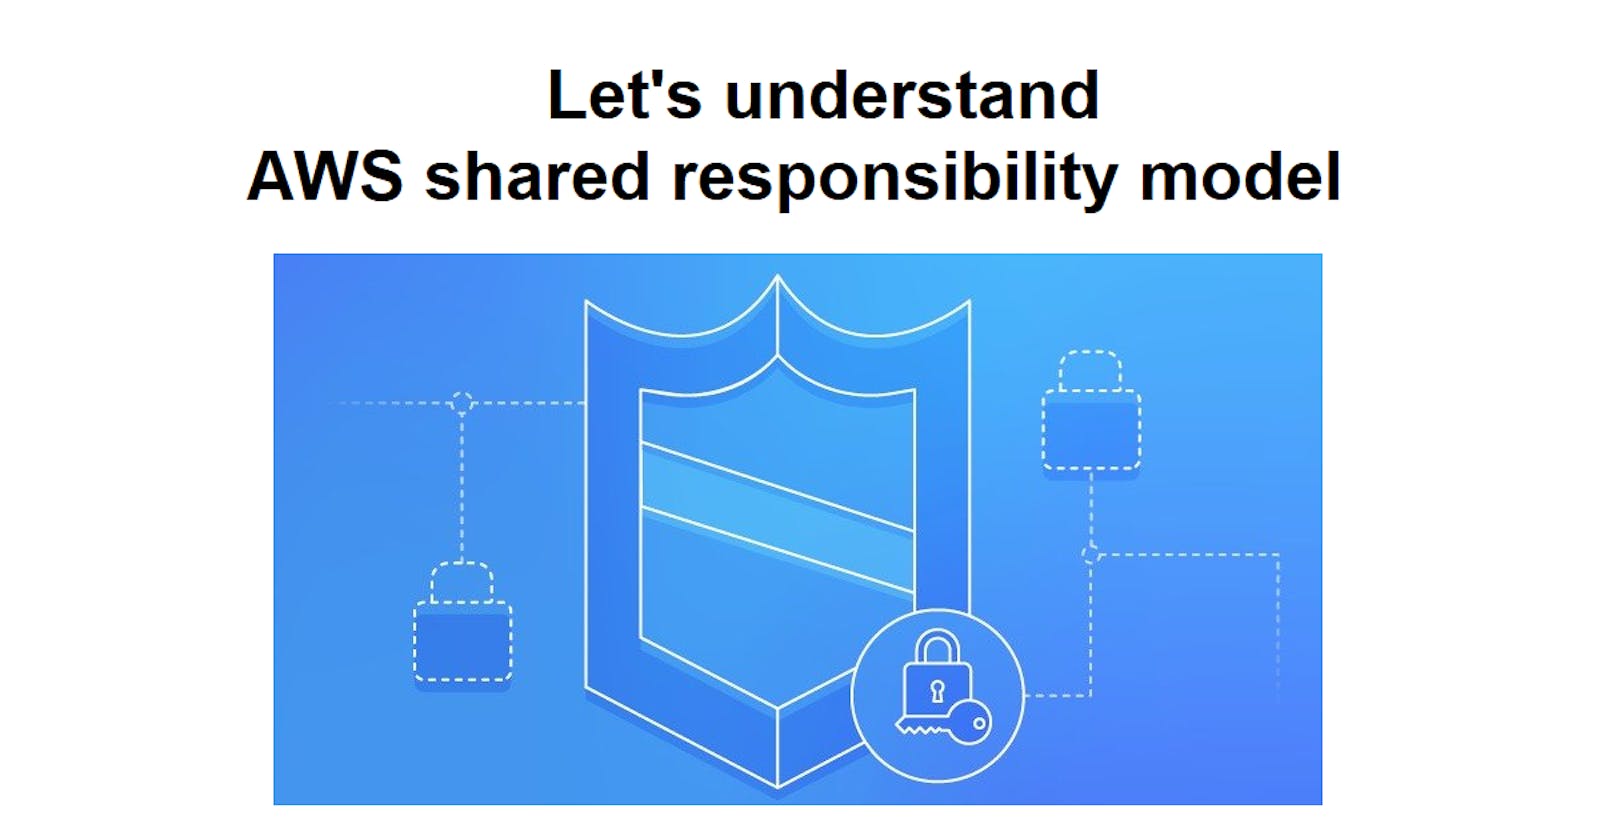 Let's understand AWS shared responsibility model